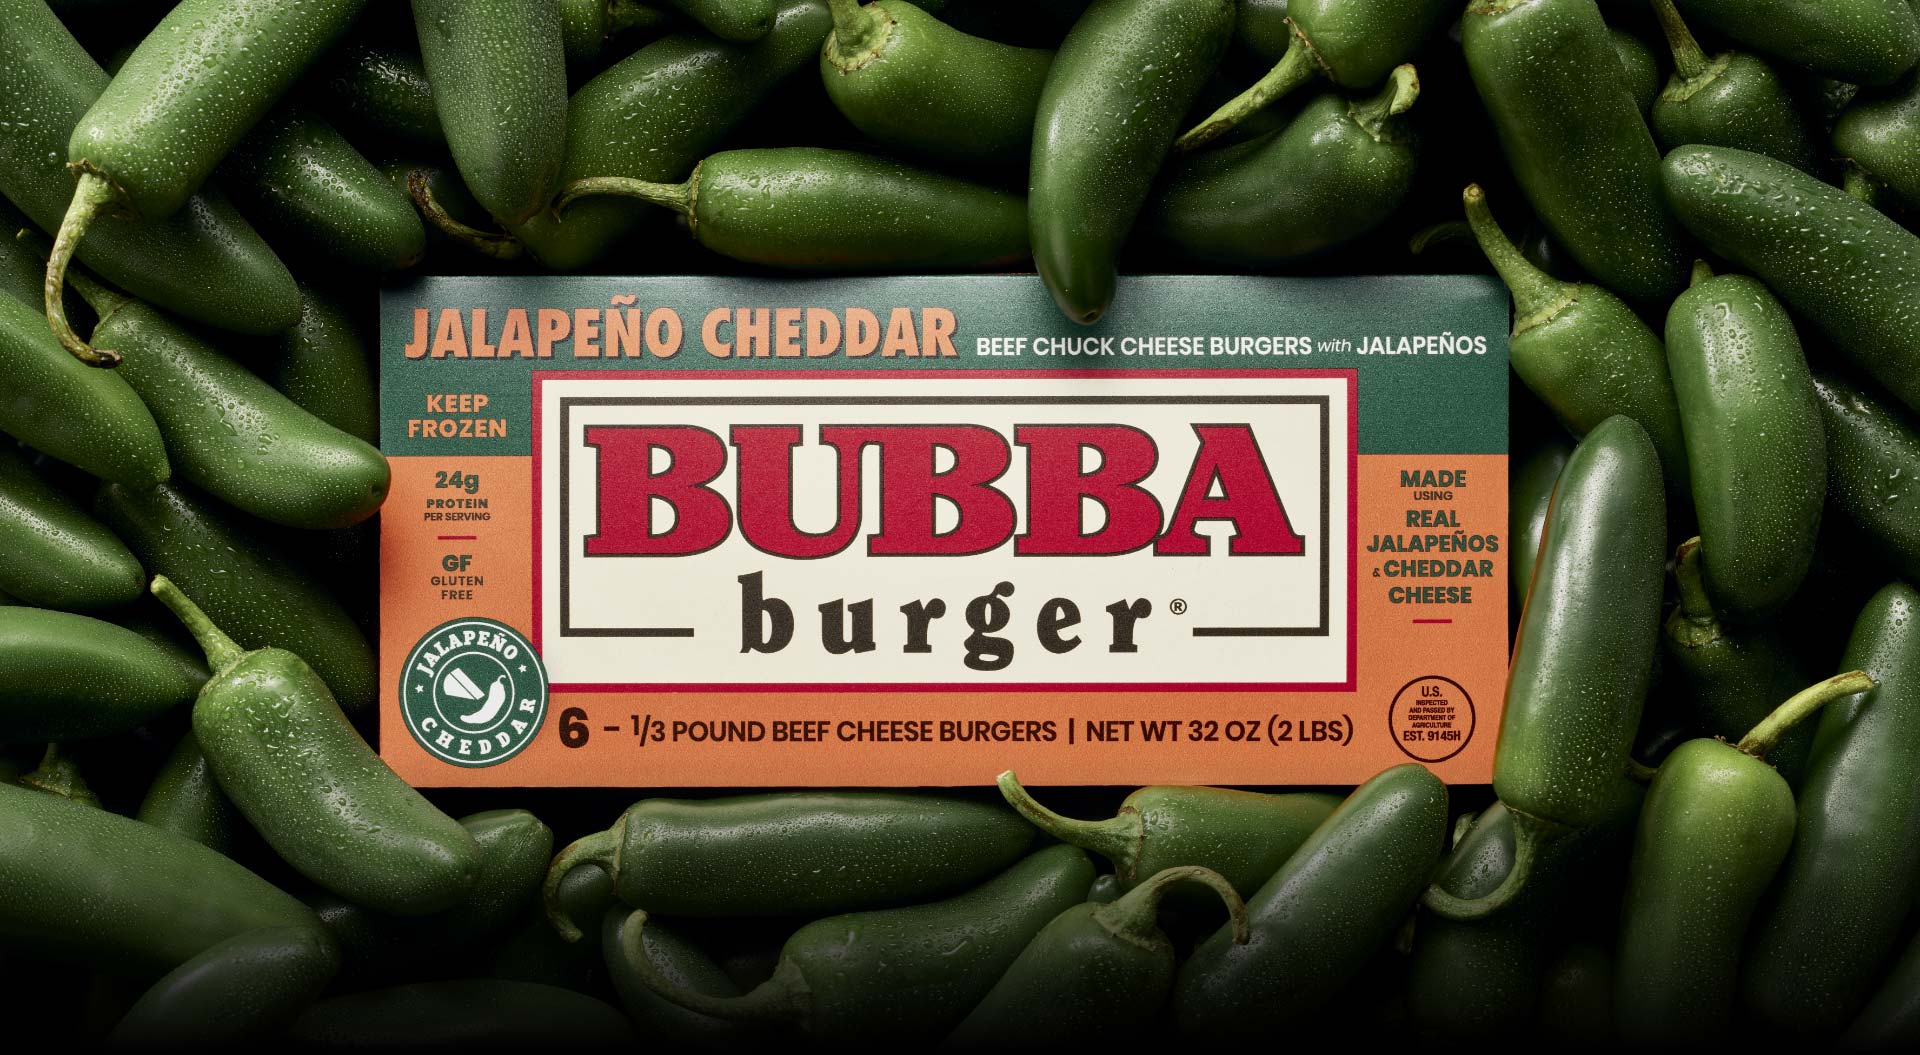 A jalapeno cheddar BUBBA burger® package surrounded by jalapenos